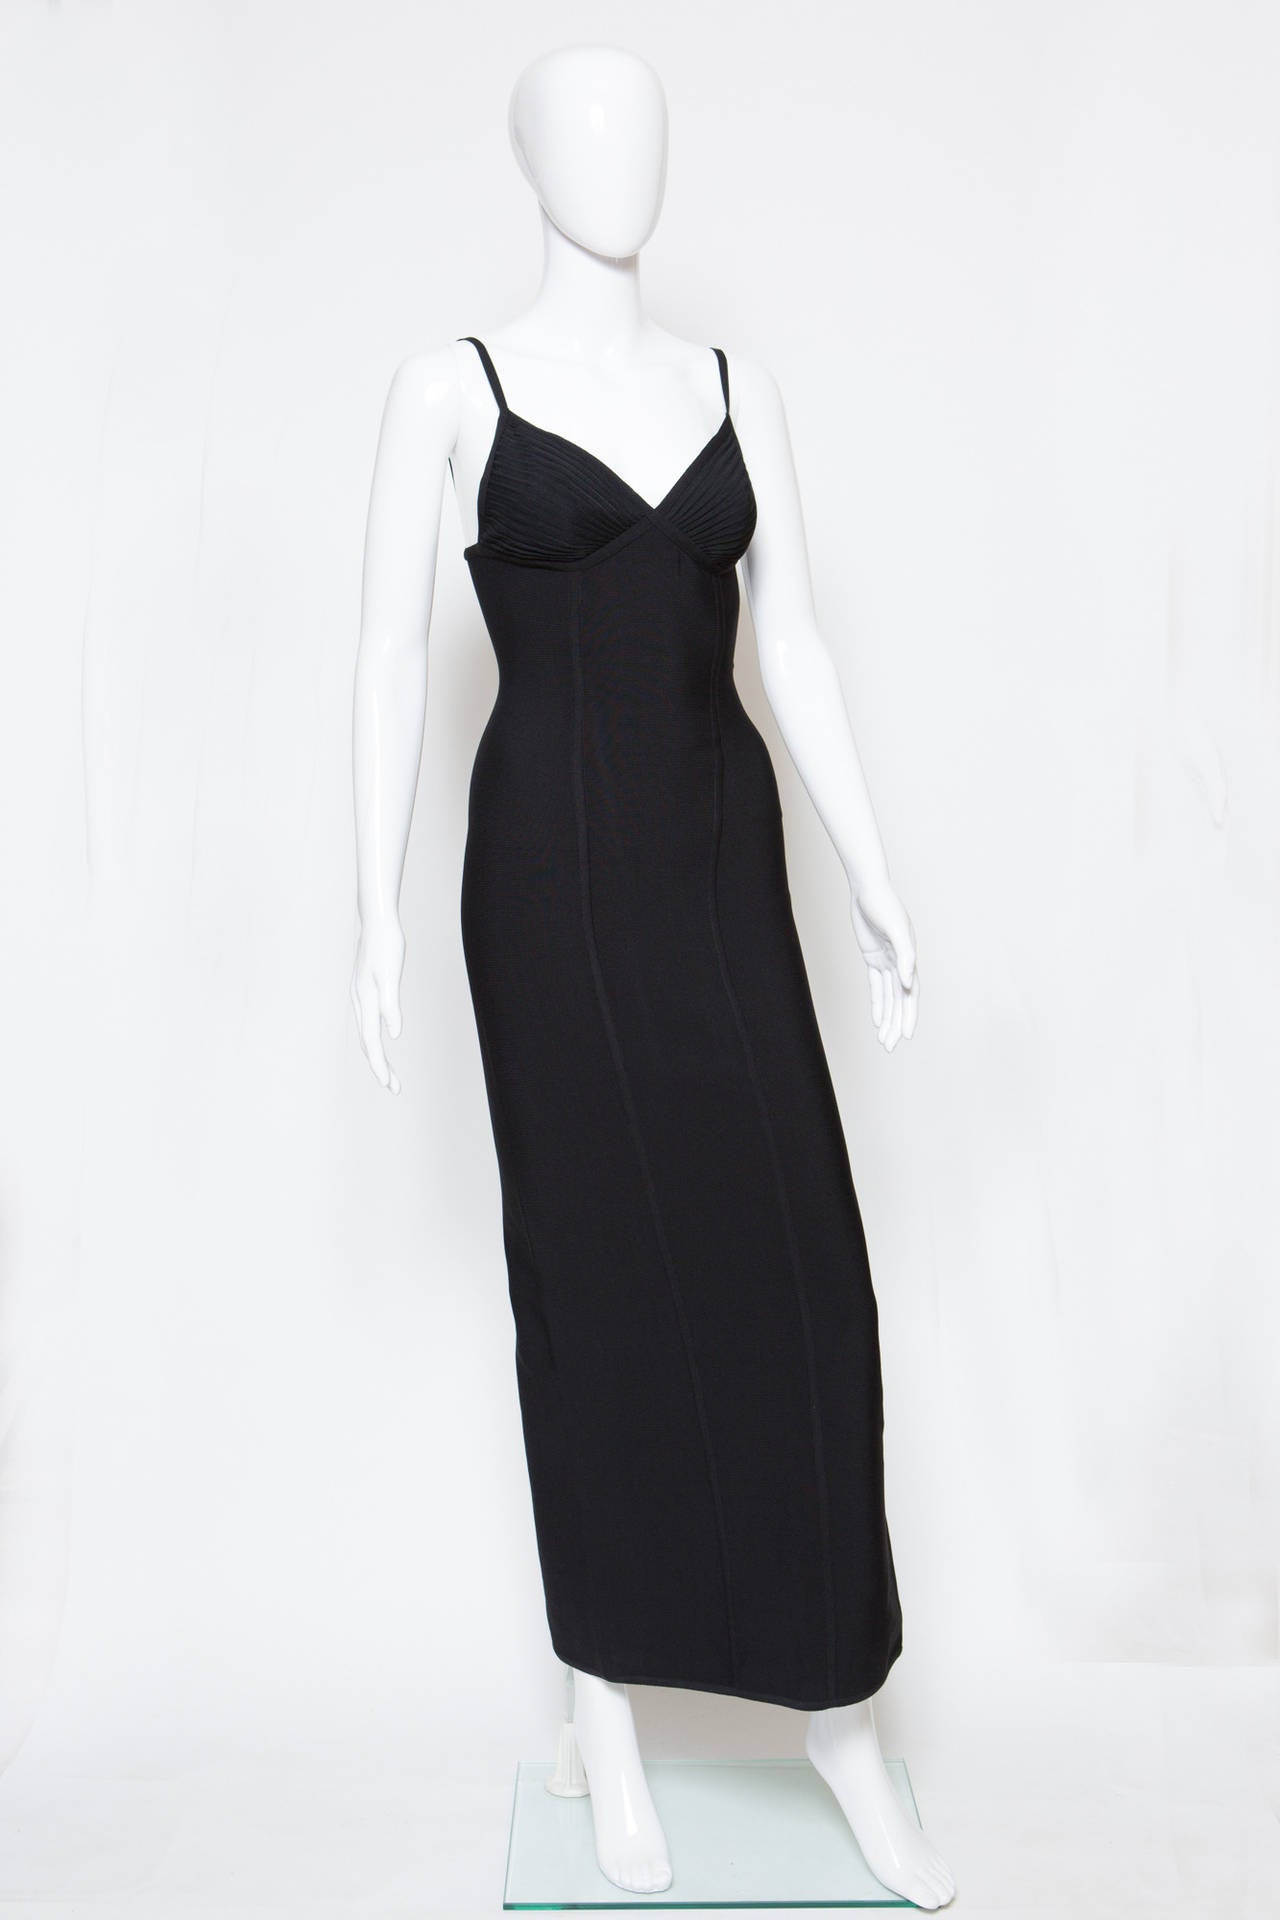 1990s Herve Leger black knitted dress designed by Herve Leroux featuring pleats on the chest, a center back slit, front  vertical yokes details, a center back zip. 
Composition :95% rayon 5% lycra
Size label M Estimated size 38fr